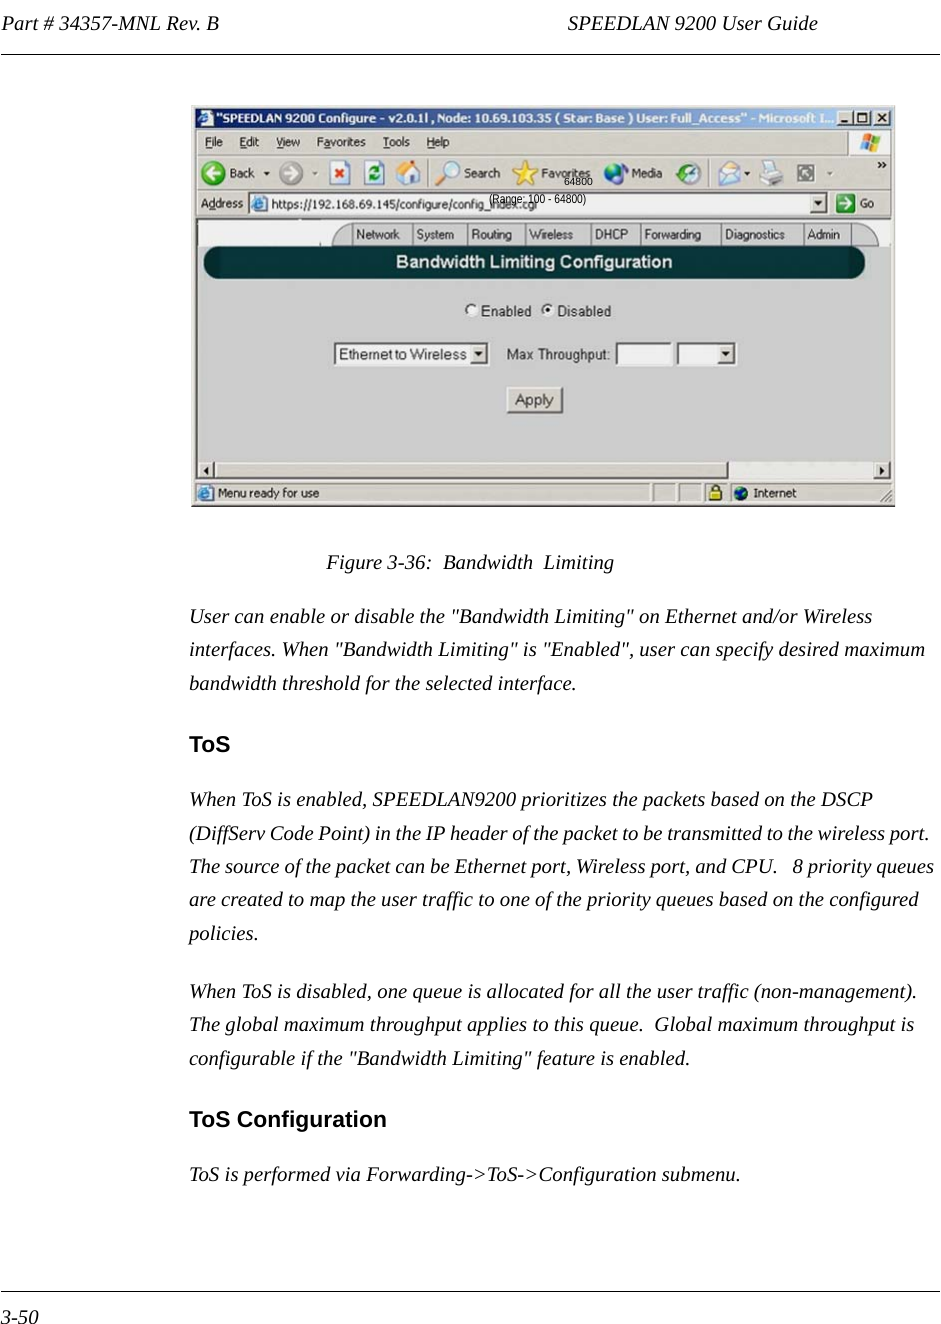 Part # 34357-MNL Rev. B                                                                   SPEEDLAN 9200 User Guide 3-50Figure 3-36:  Bandwidth  LimitingUser can enable or disable the &quot;Bandwidth Limiting&quot; on Ethernet and/or Wireless interfaces. When &quot;Bandwidth Limiting&quot; is &quot;Enabled&quot;, user can specify desired maximum bandwidth threshold for the selected interface.ToSWhen ToS is enabled, SPEEDLAN9200 prioritizes the packets based on the DSCP (DiffServ Code Point) in the IP header of the packet to be transmitted to the wireless port.  The source of the packet can be Ethernet port, Wireless port, and CPU.   8 priority queues are created to map the user traffic to one of the priority queues based on the configured policies.When ToS is disabled, one queue is allocated for all the user traffic (non-management). The global maximum throughput applies to this queue.  Global maximum throughput is configurable if the &quot;Bandwidth Limiting&quot; feature is enabled.ToS ConfigurationToS is performed via Forwarding-&gt;ToS-&gt;Configuration submenu. 64800(Range: 100 - 64800)